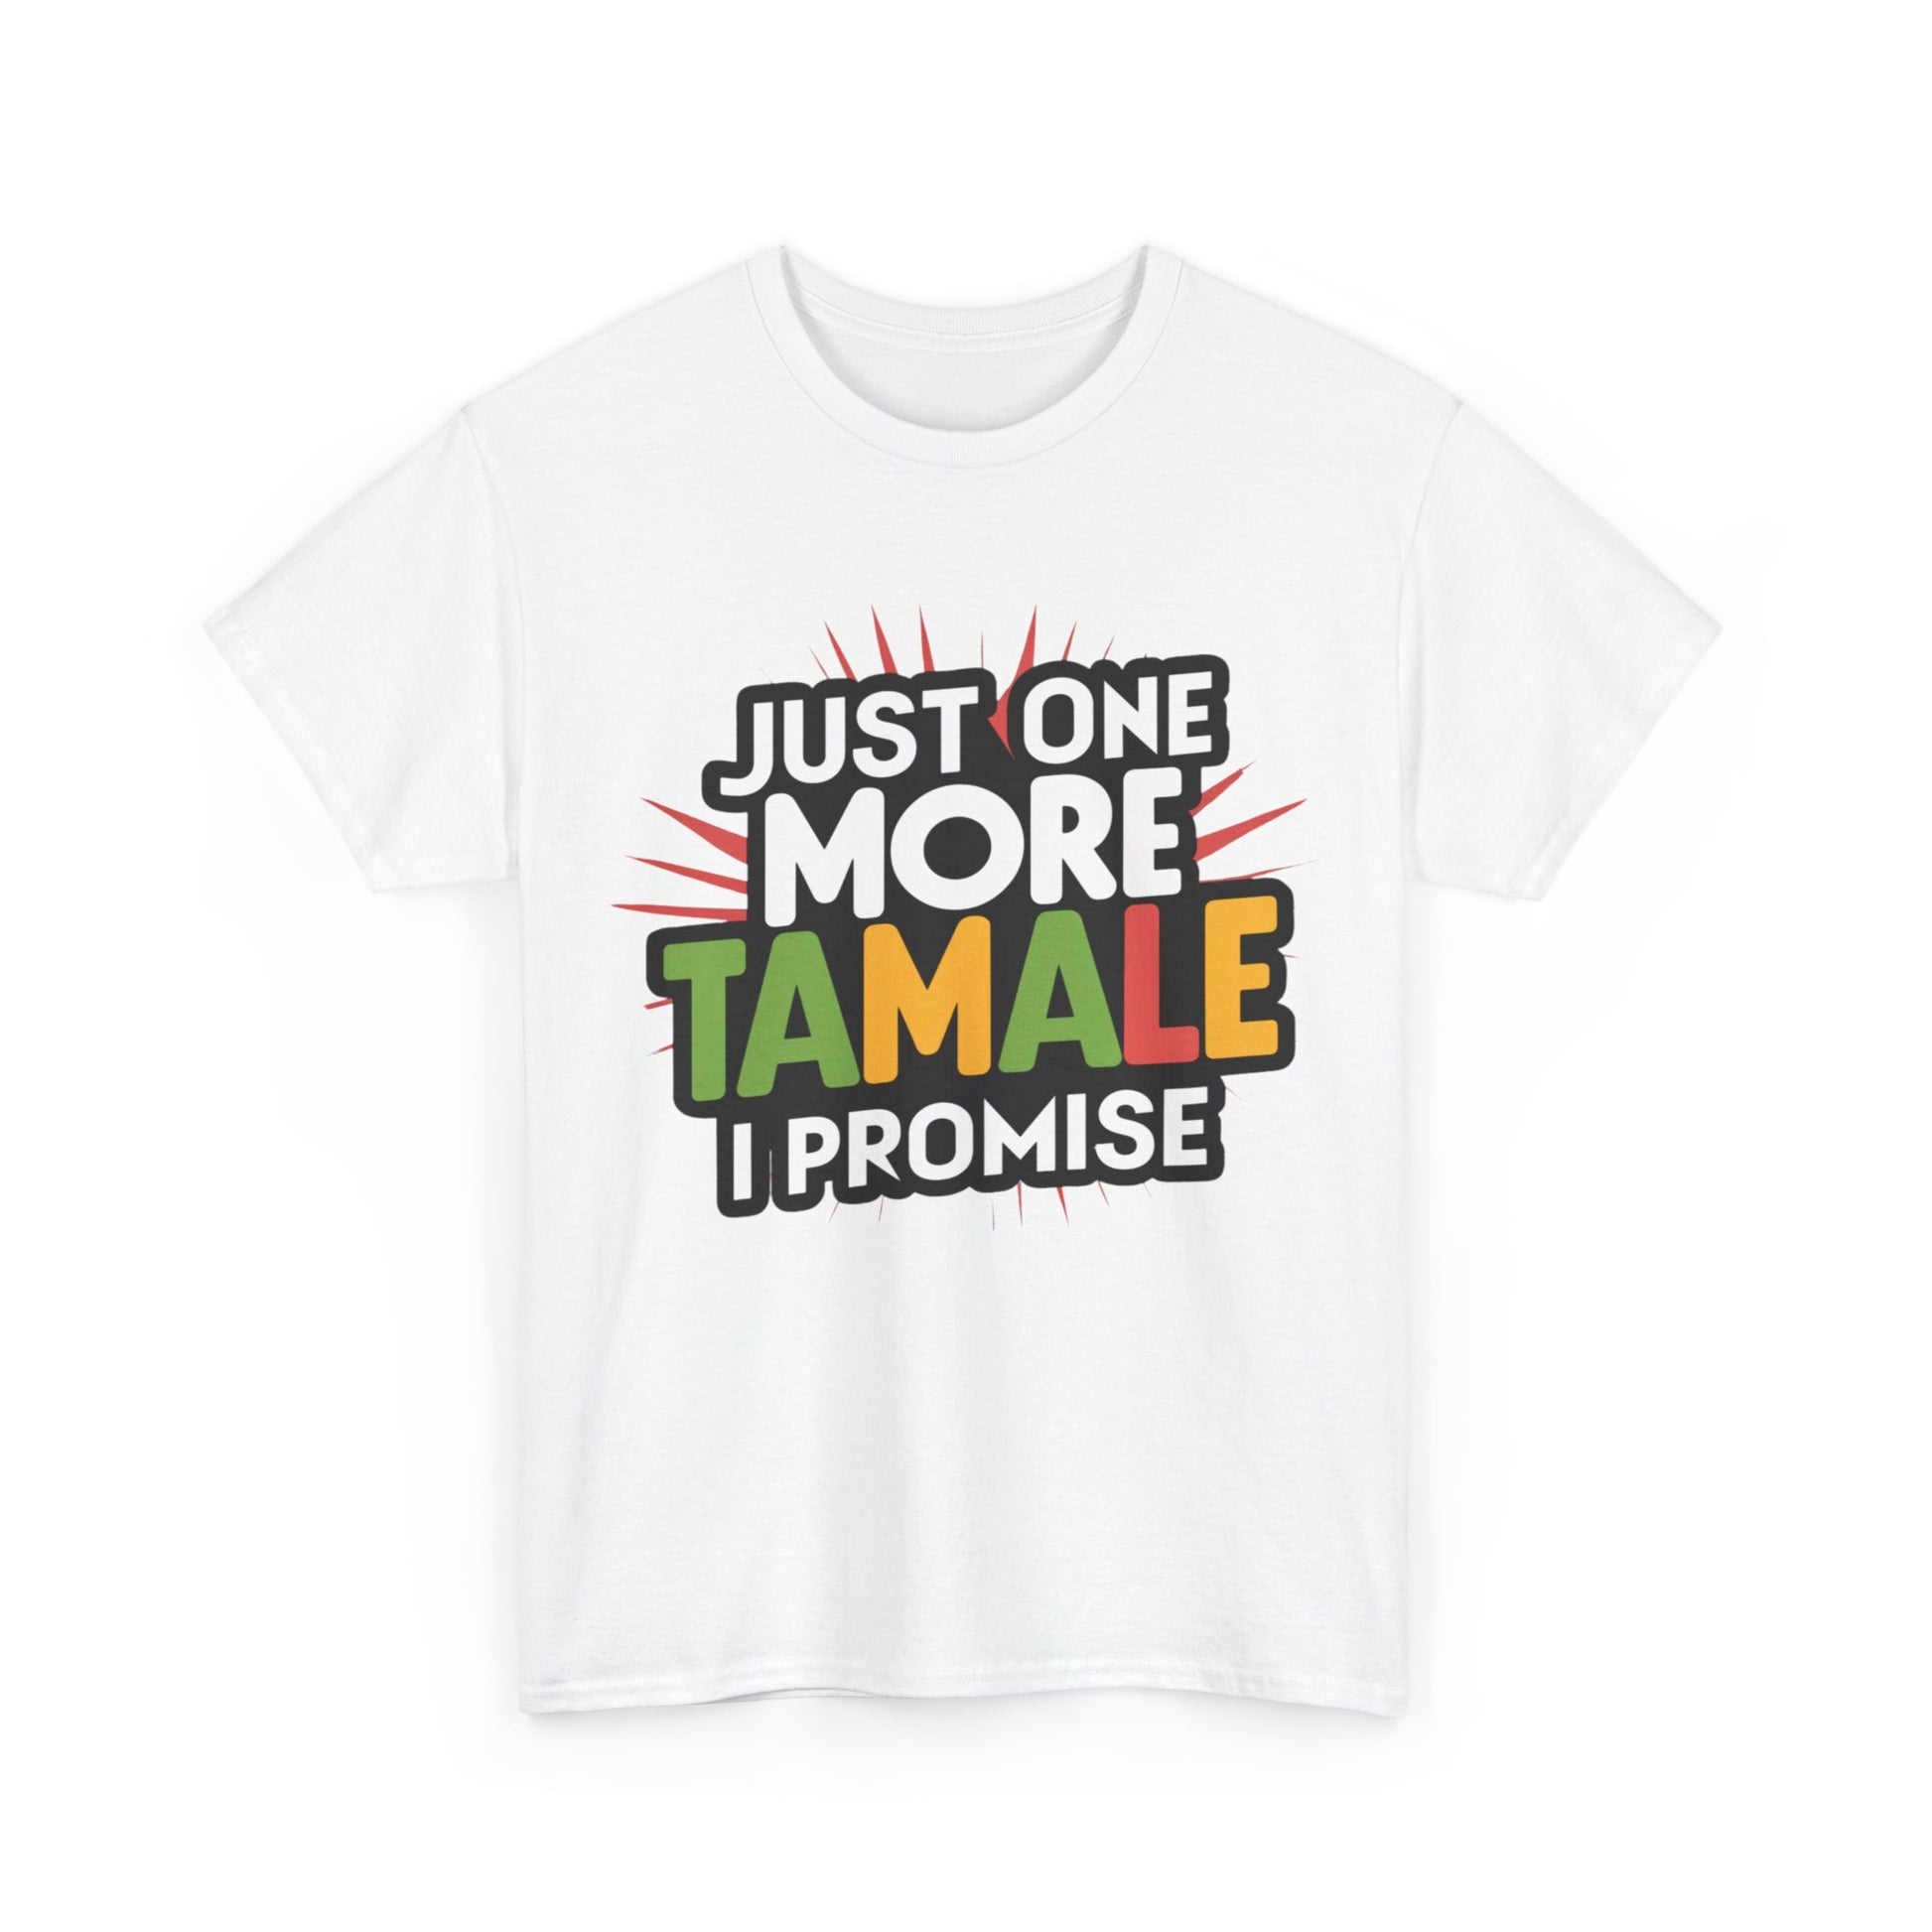 Just One More Tamale I Promise Mexican Food Graphic Unisex Heavy Cotton Tee Cotton Funny Humorous Graphic Soft Premium Unisex Men Women White T-shirt Birthday Gift-42